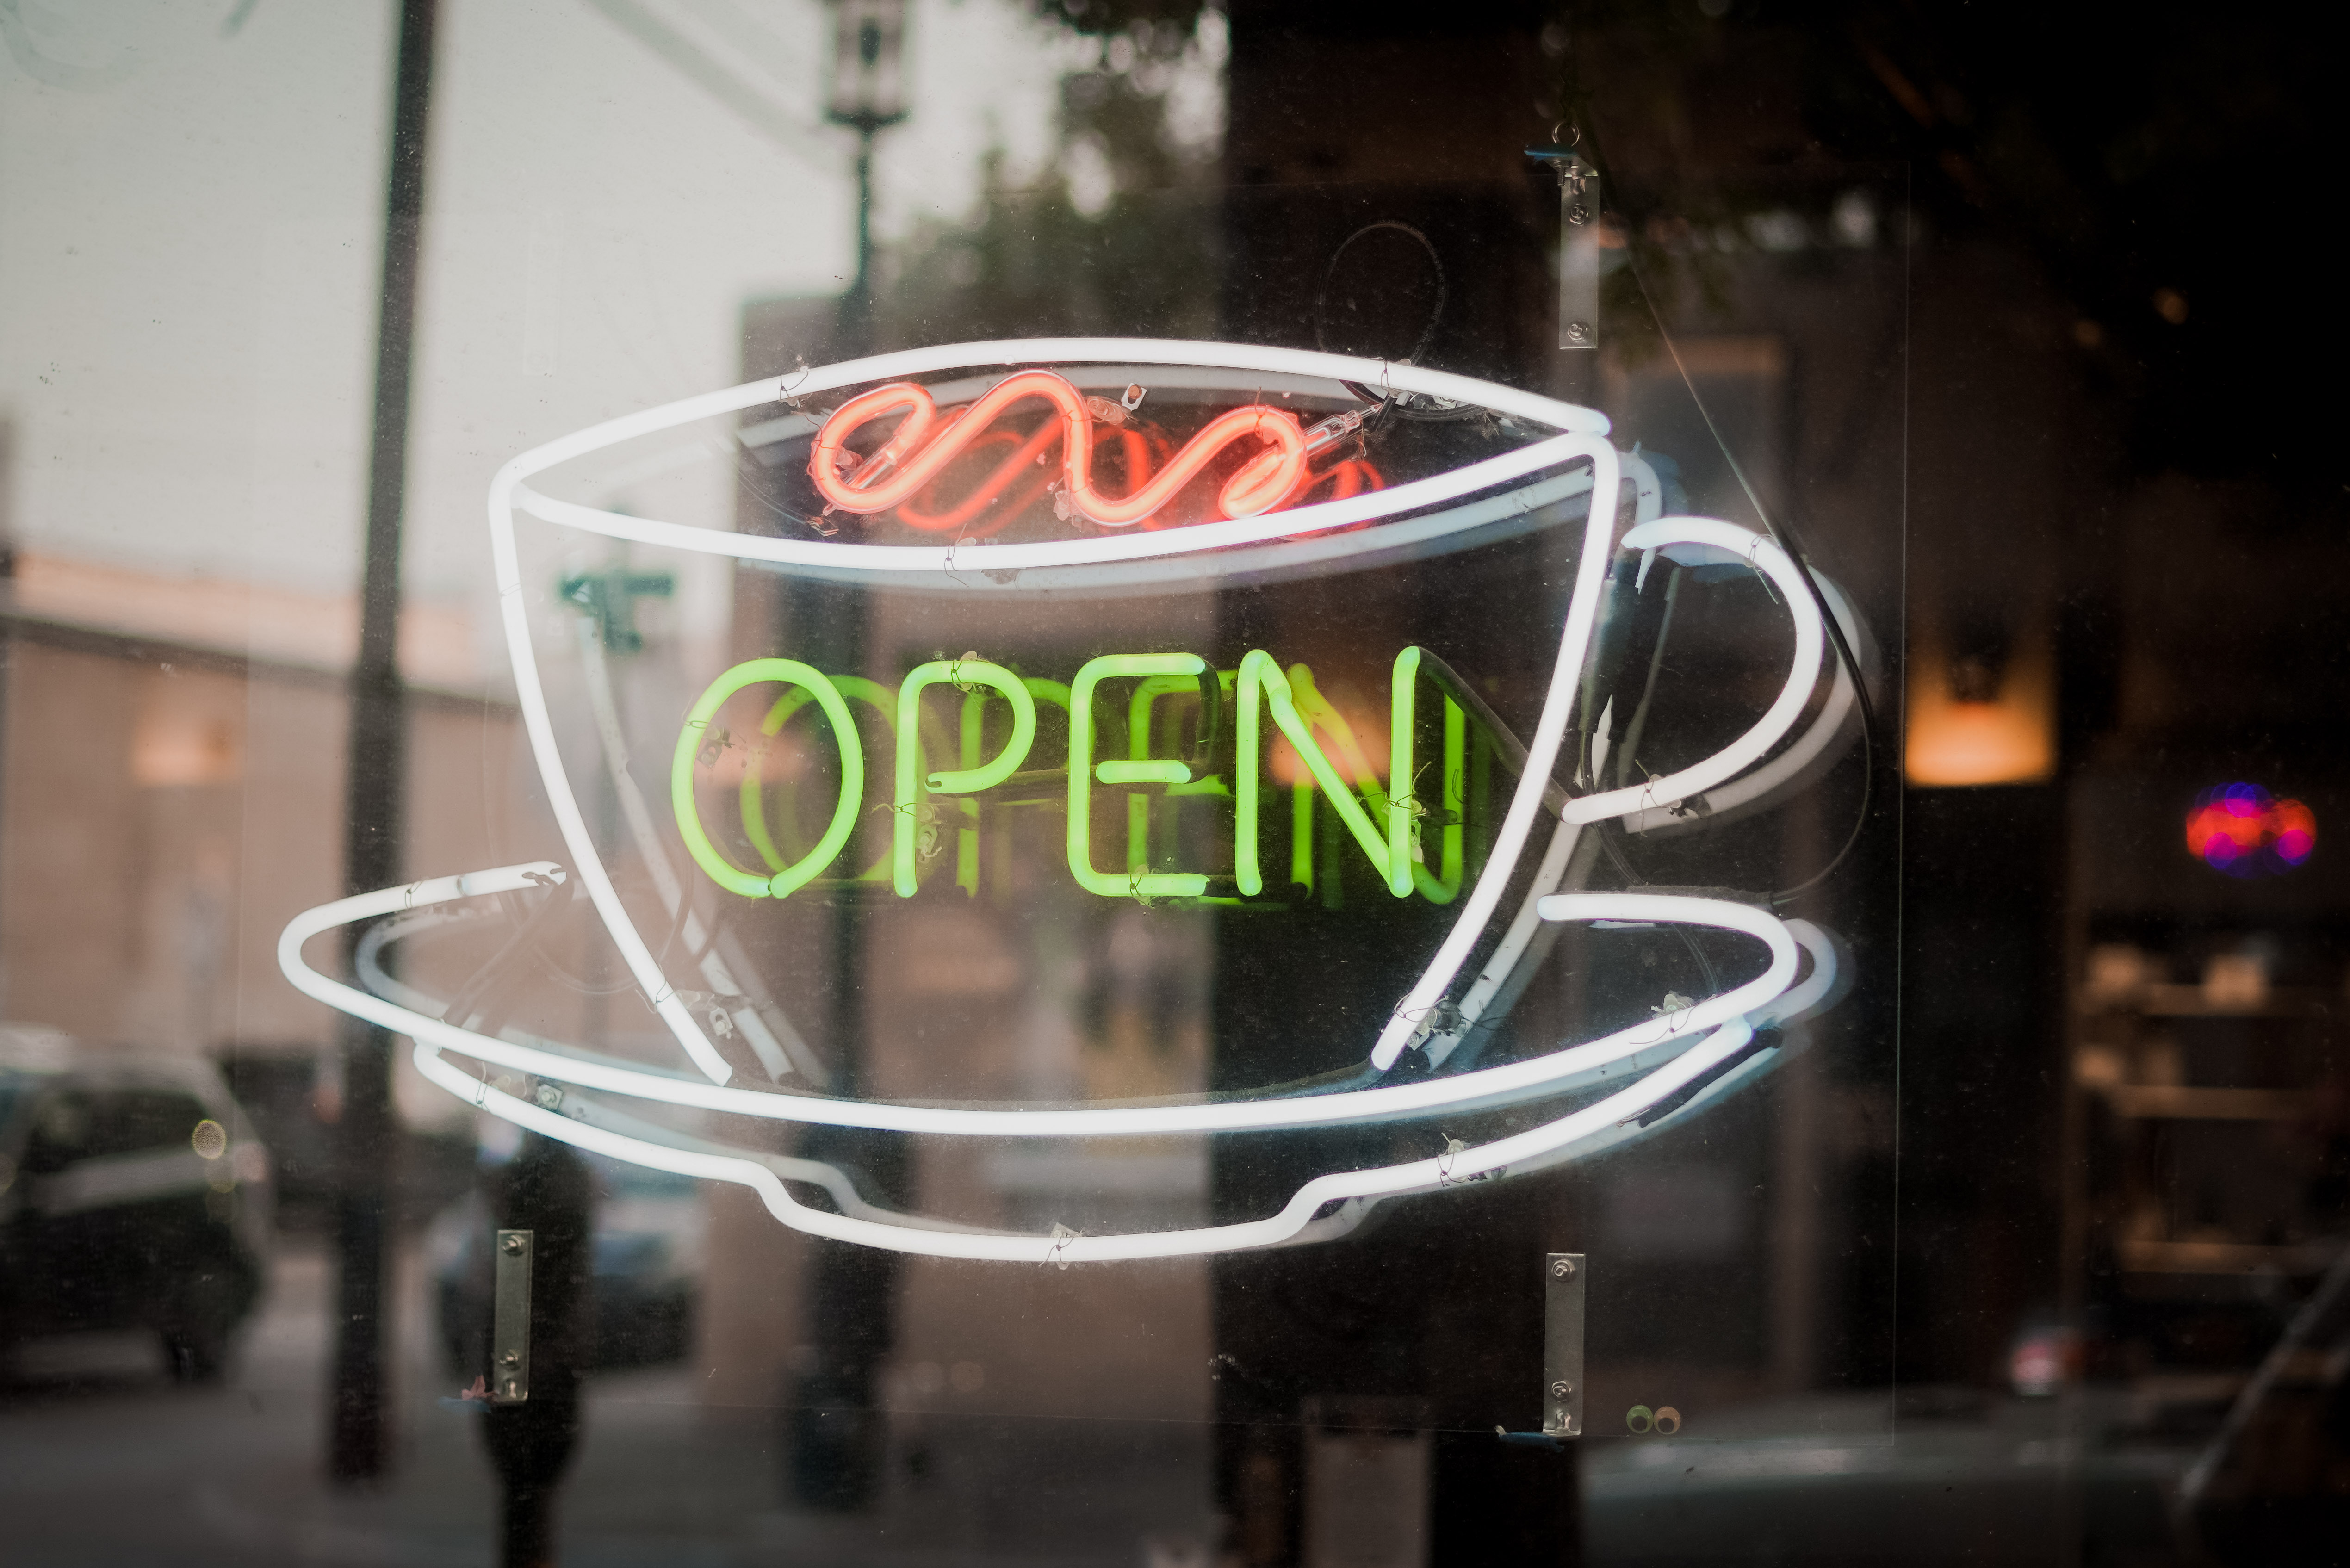 A neon sign with coffee that says "open"